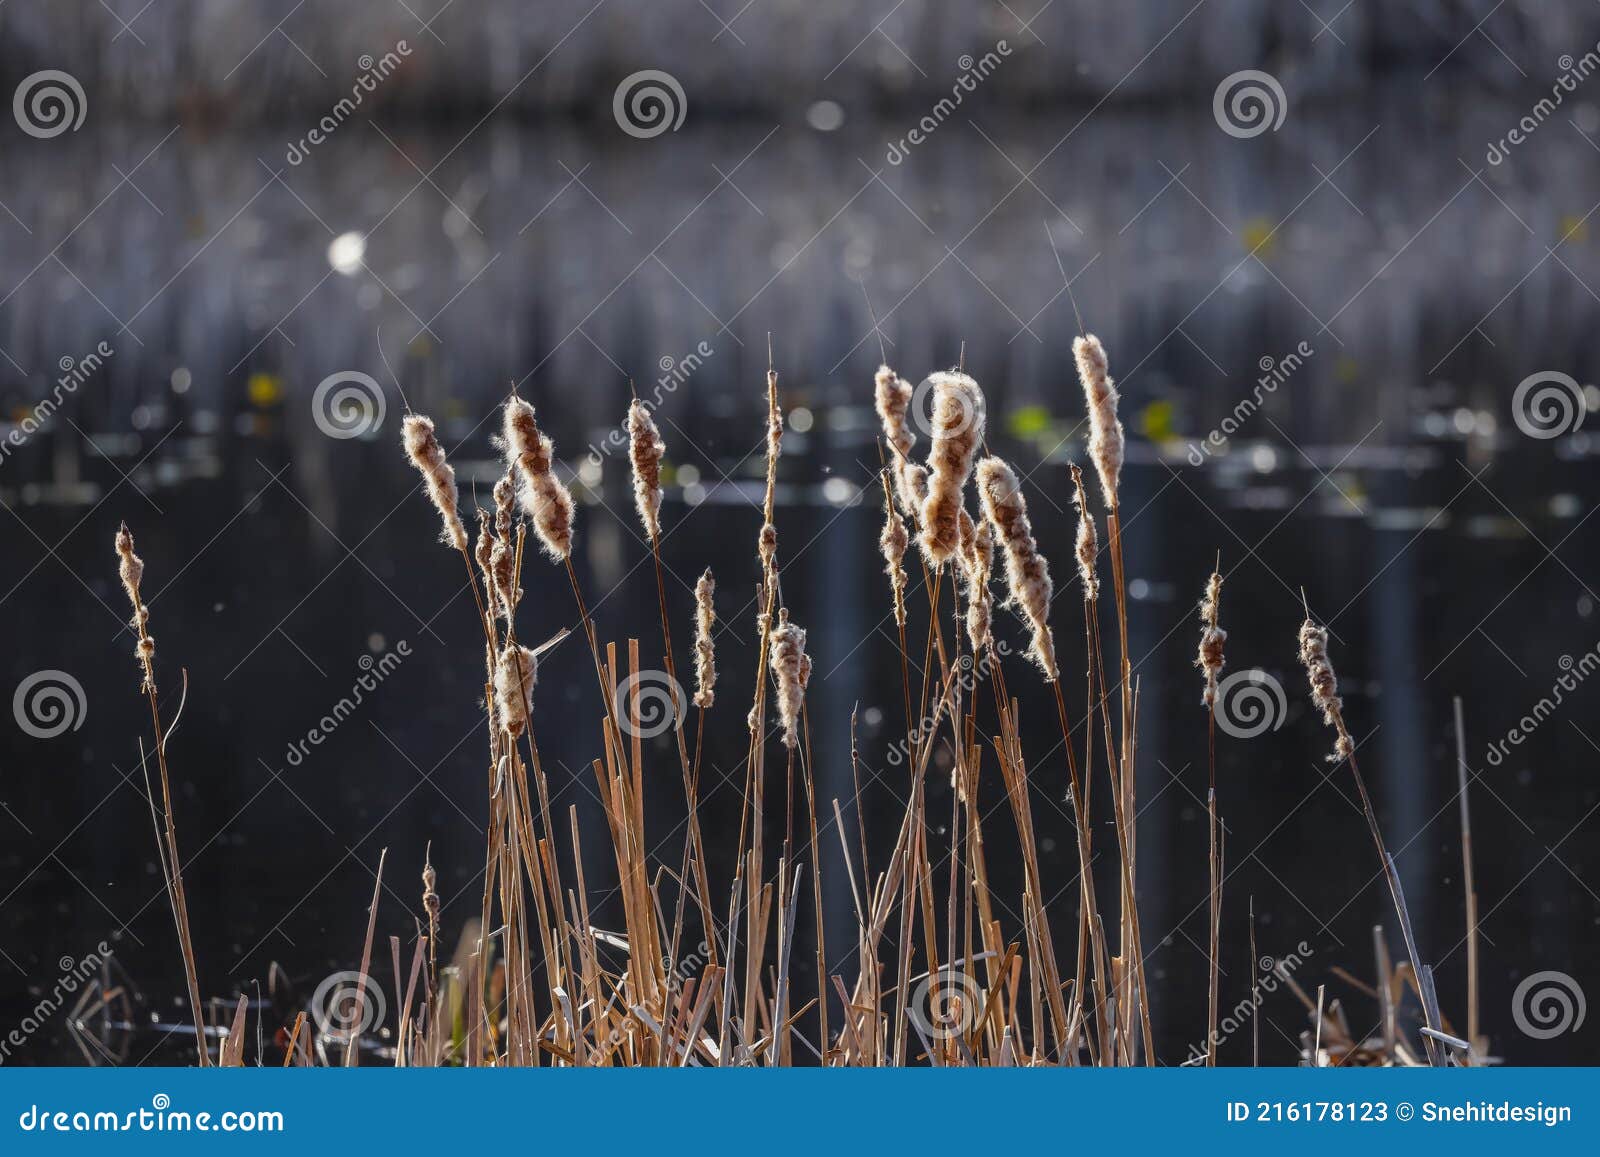 Tall Bulrush Grass in Wetlands Stock Image - Image of reed, bulrushes ...